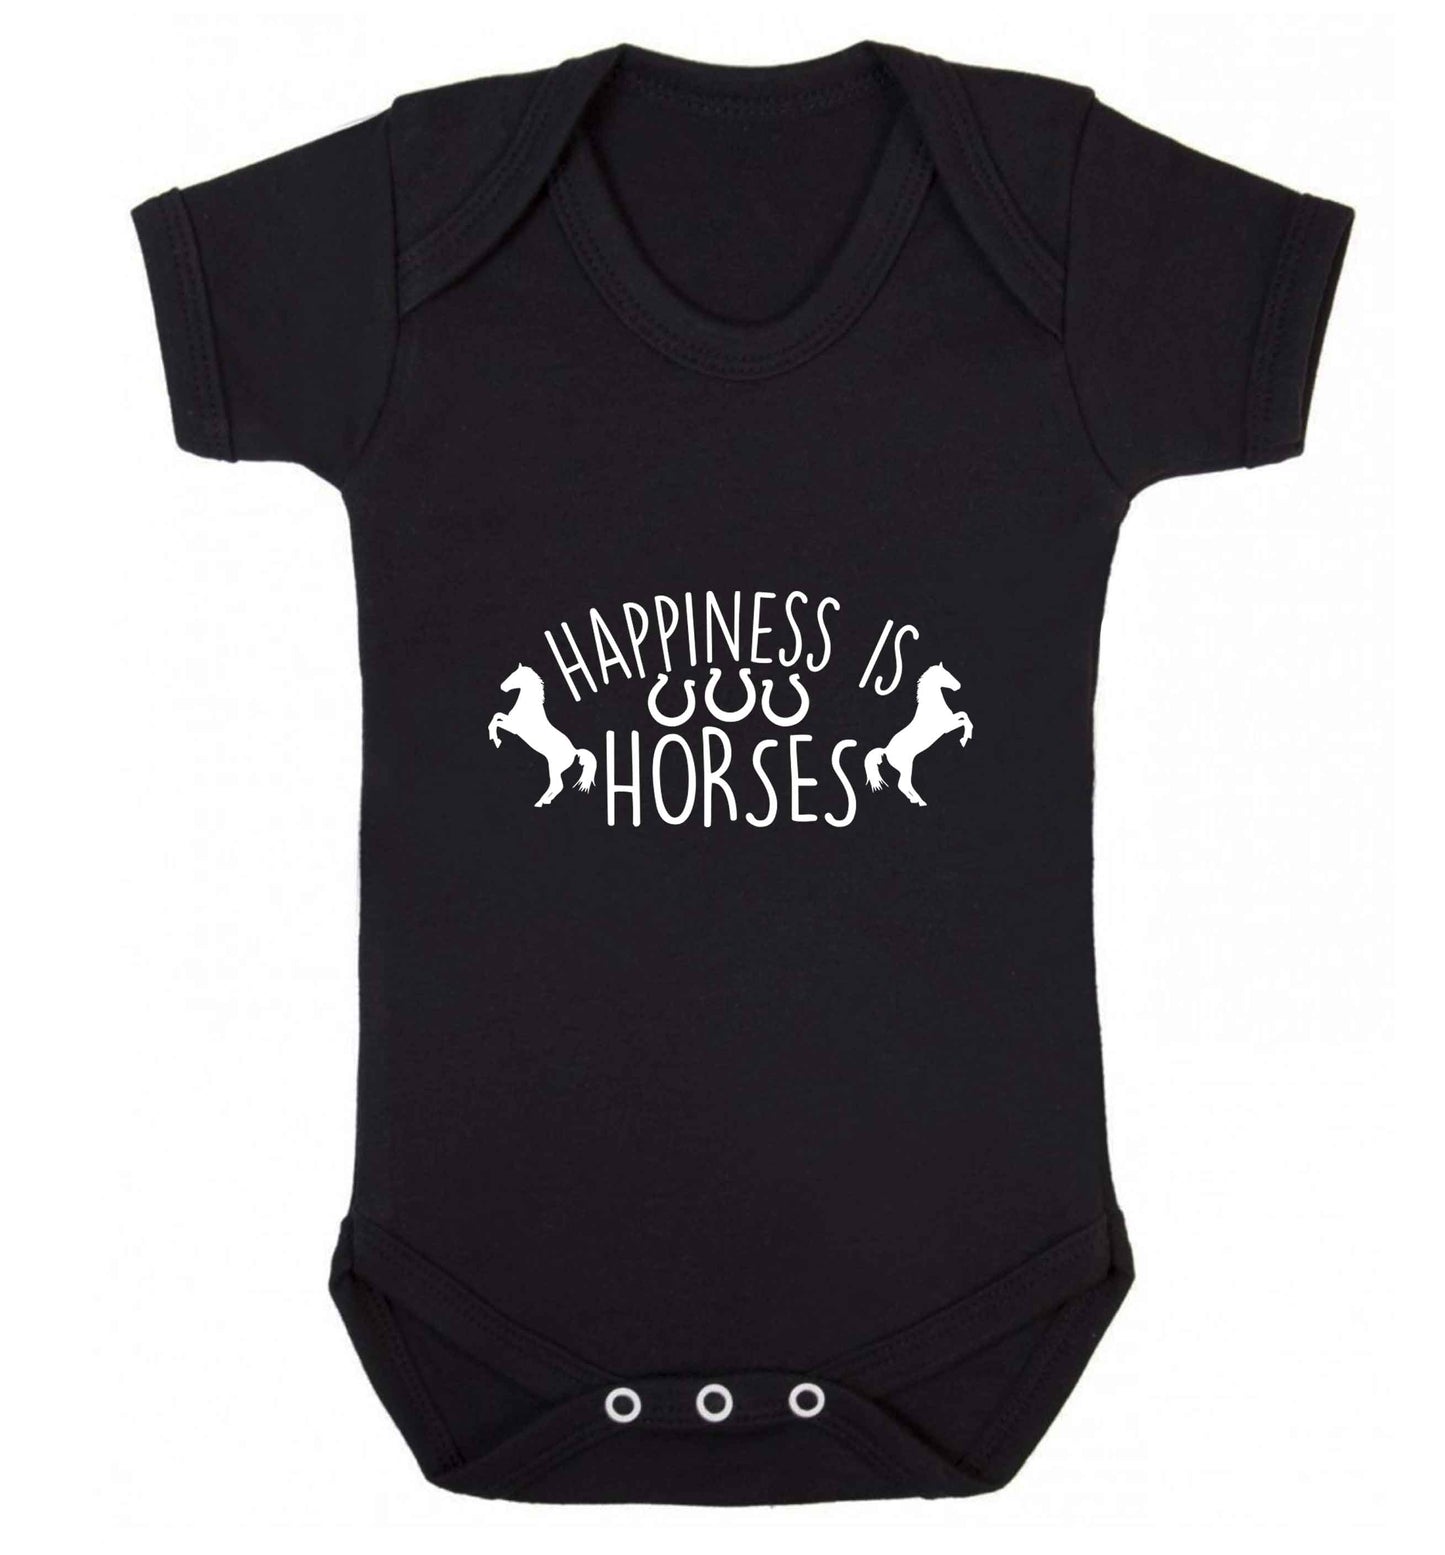 Happiness is horses baby vest black 18-24 months